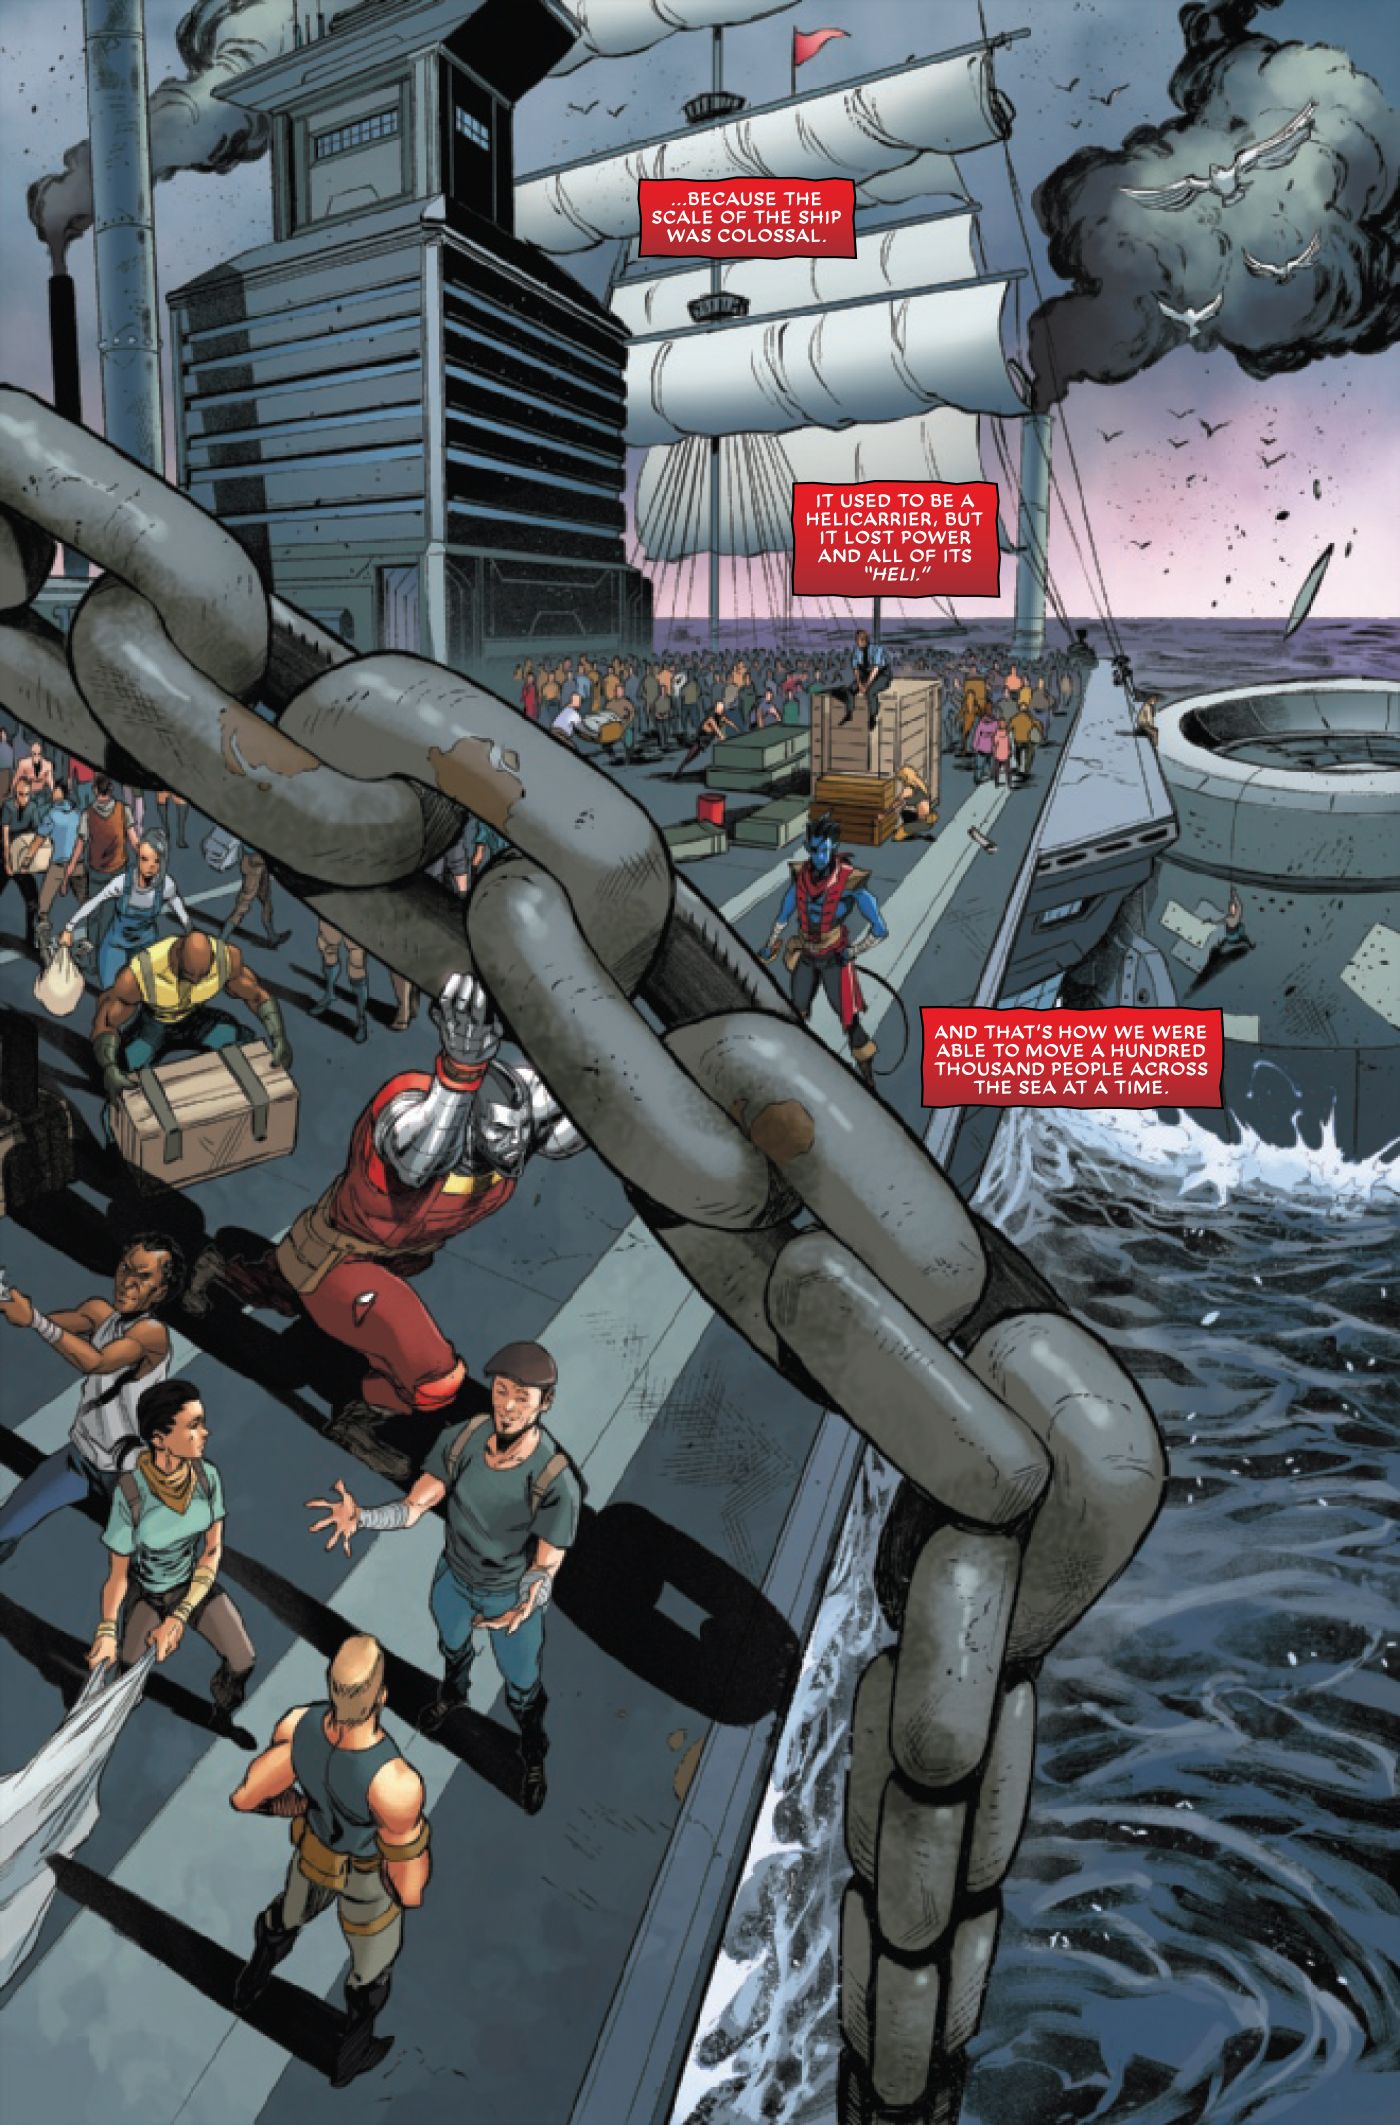 The helicarrier can no longer fly, but is used as a boat for European refugees.